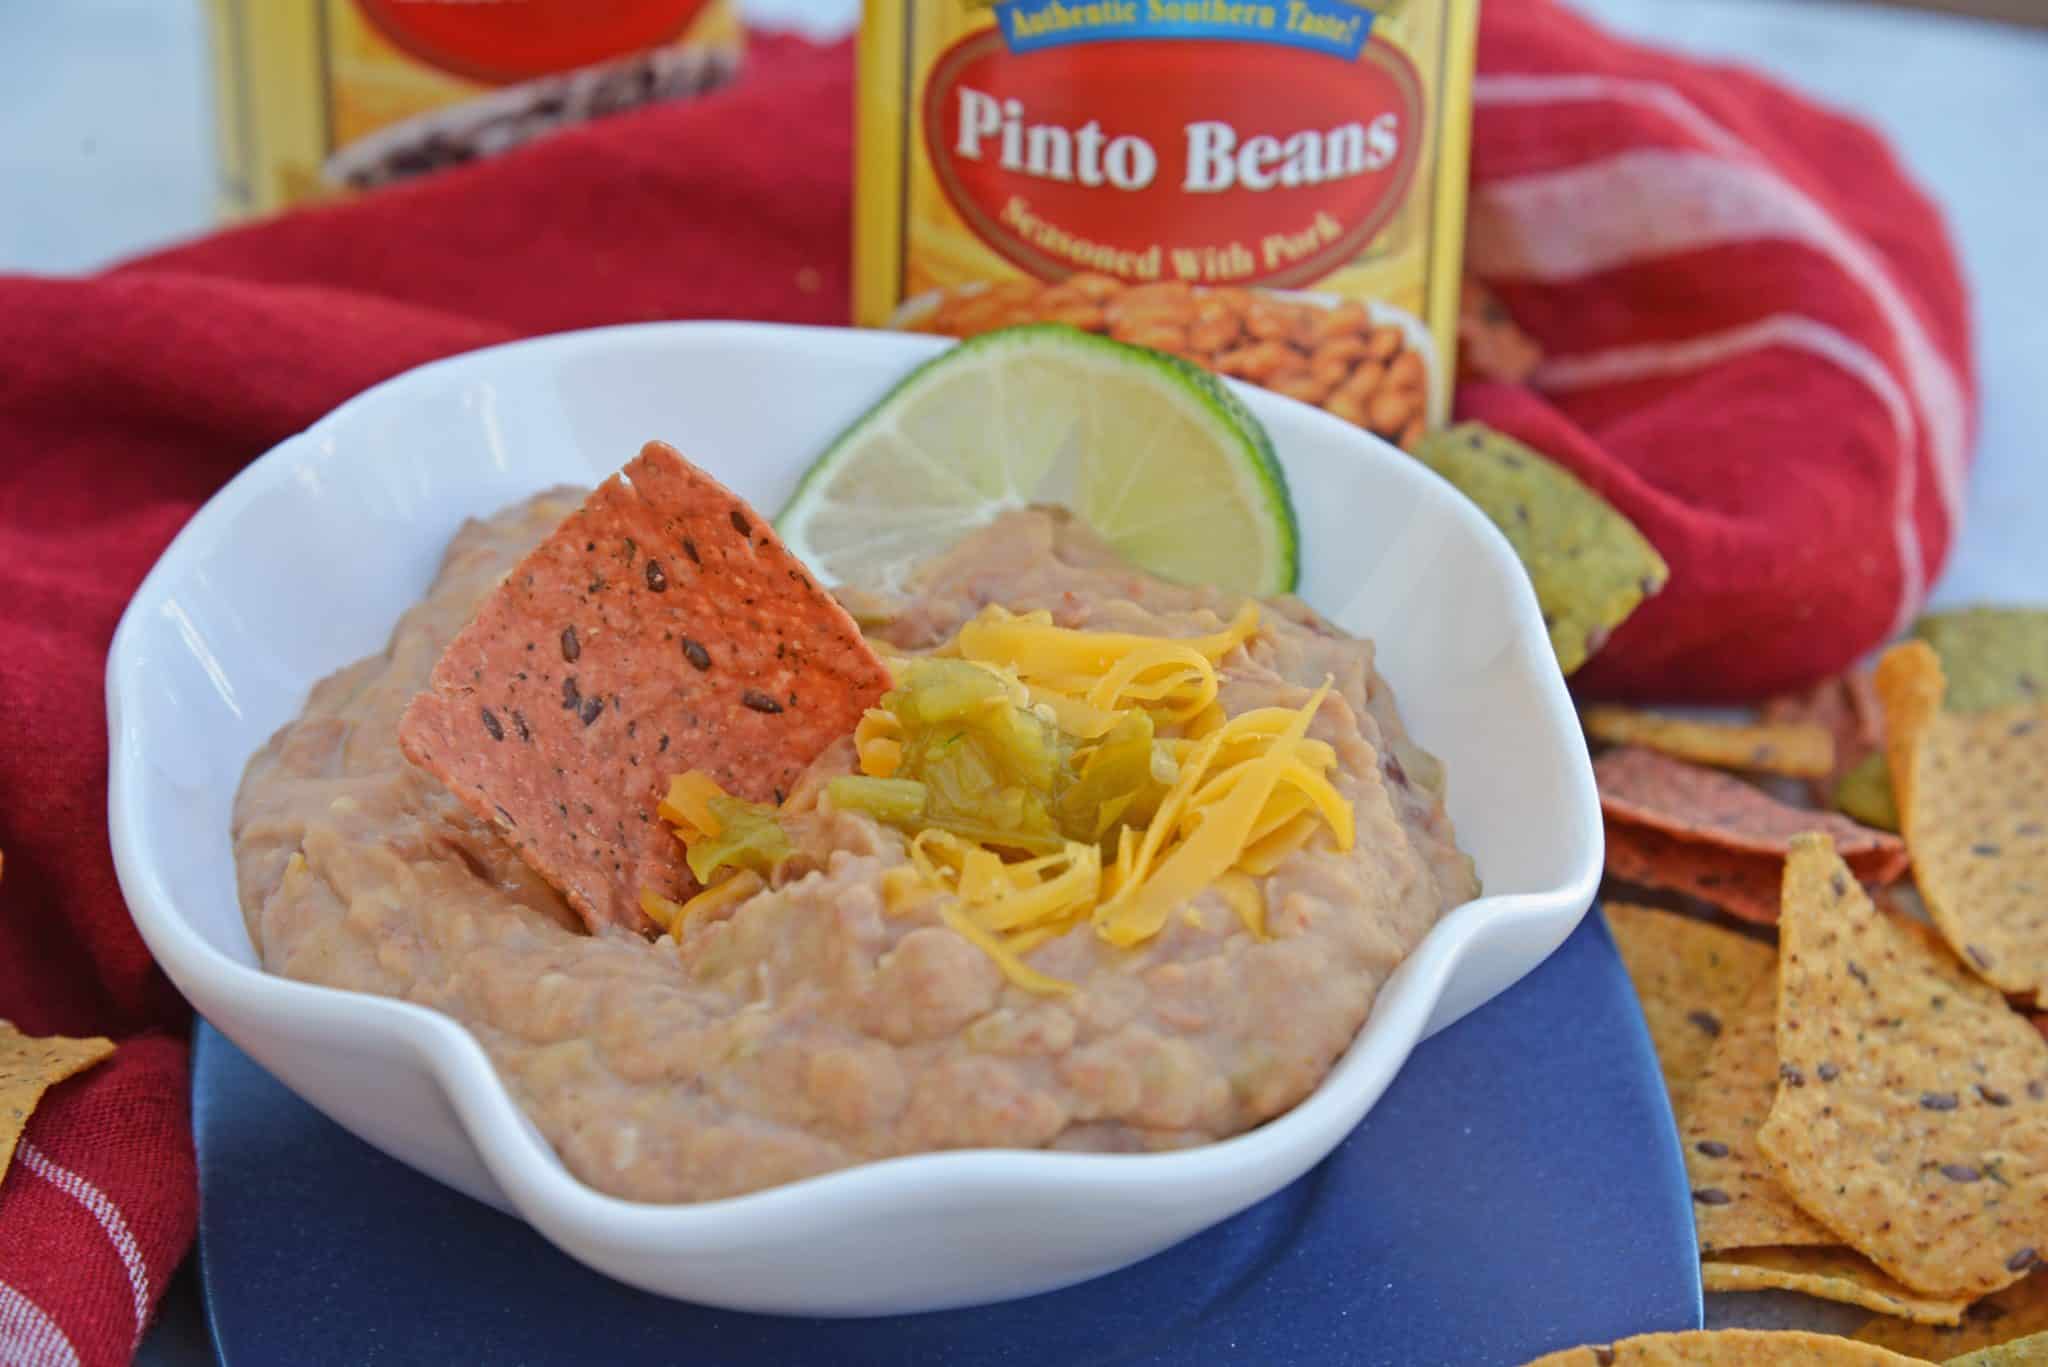 Mexican Refried Beans are an easy homemade refried bean recipe using pinto beans, green chilies, cheese and Mexican spices. Ready in just 15 minutes!